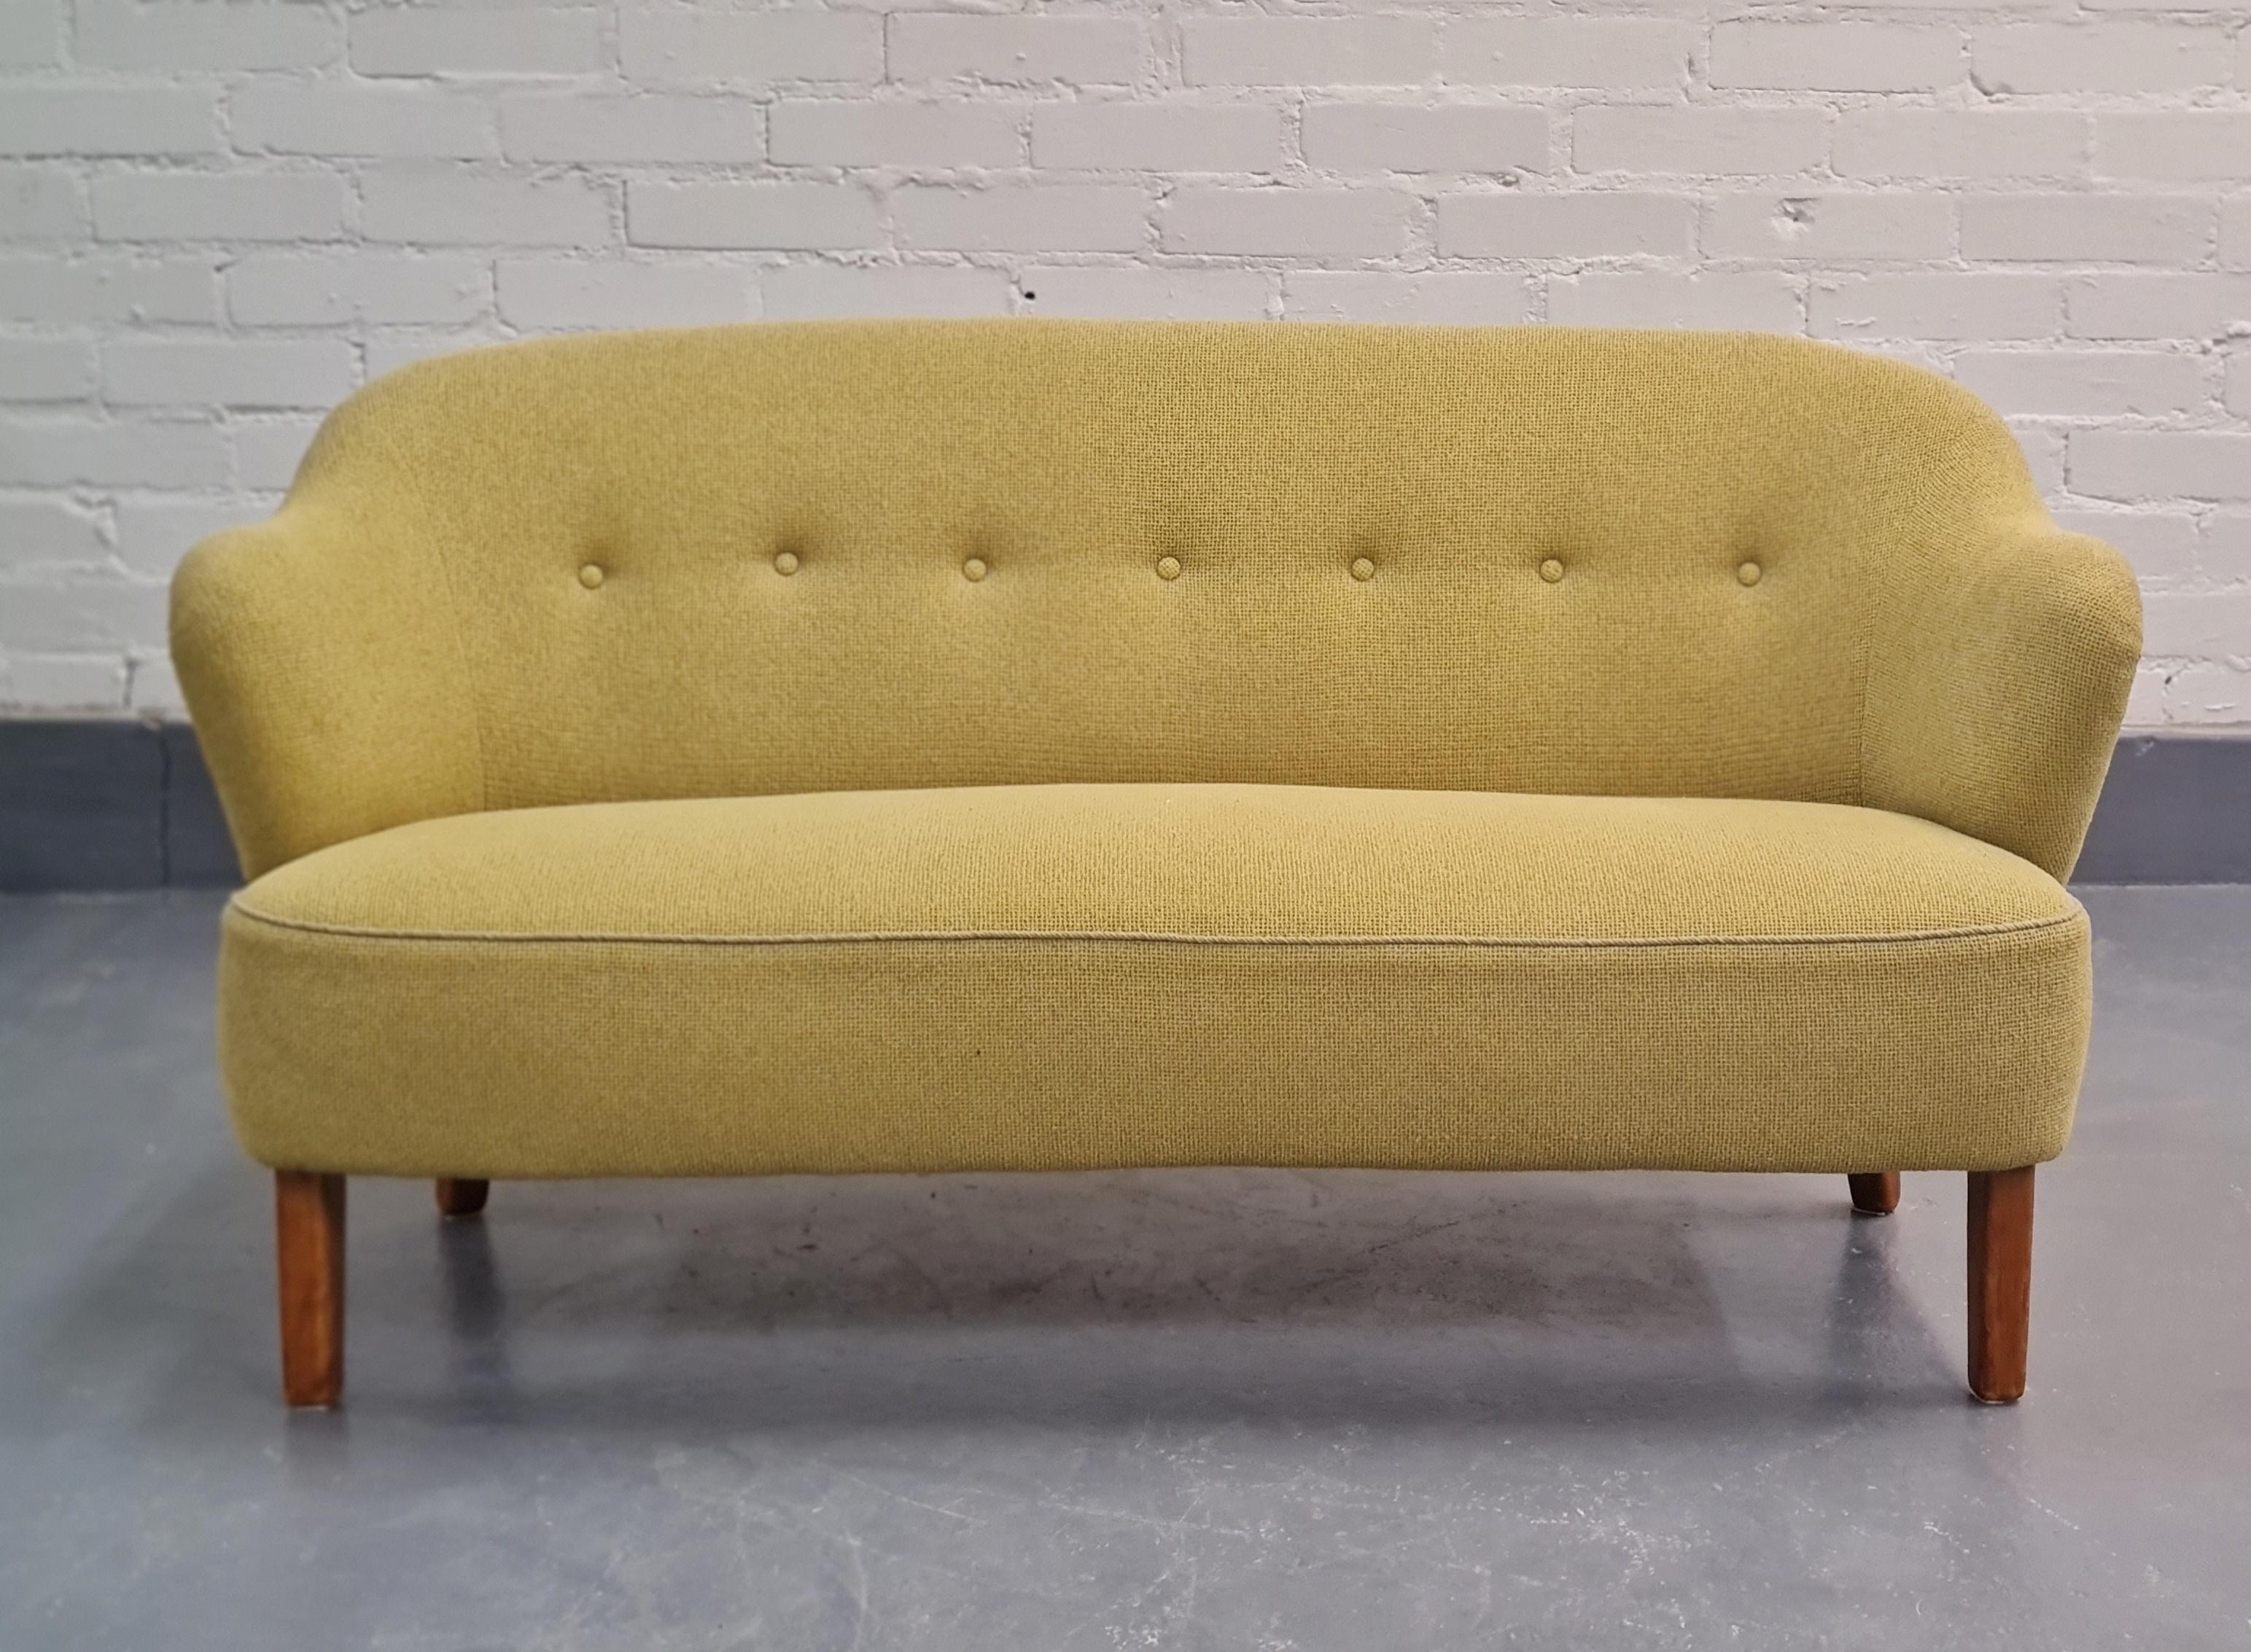 A beautiful sofa by the world famous designer Flemming Lassen. This sofa was manufactured by Asko in the 1950s. Included is a drawing of the original sketch by Asko.
The overall condition is quite good.